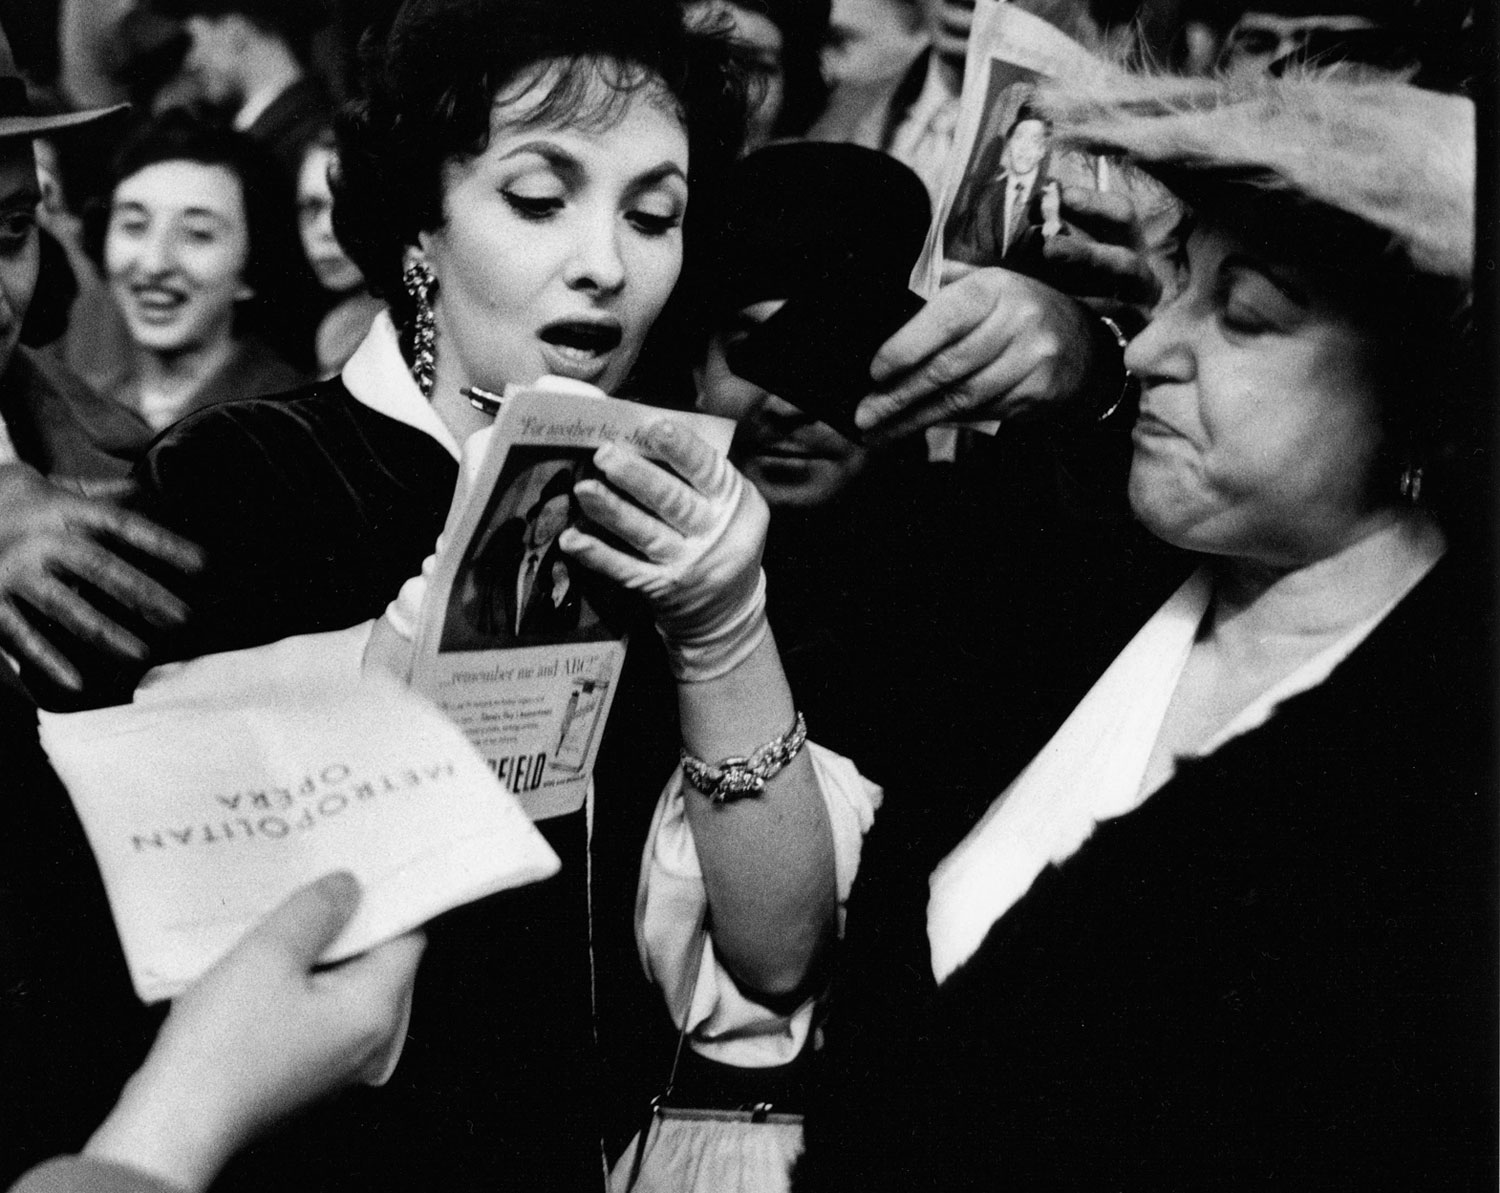 Gina Lollobrigida signs autographs in front of New York's old Metropolitan Opera House, 1958.